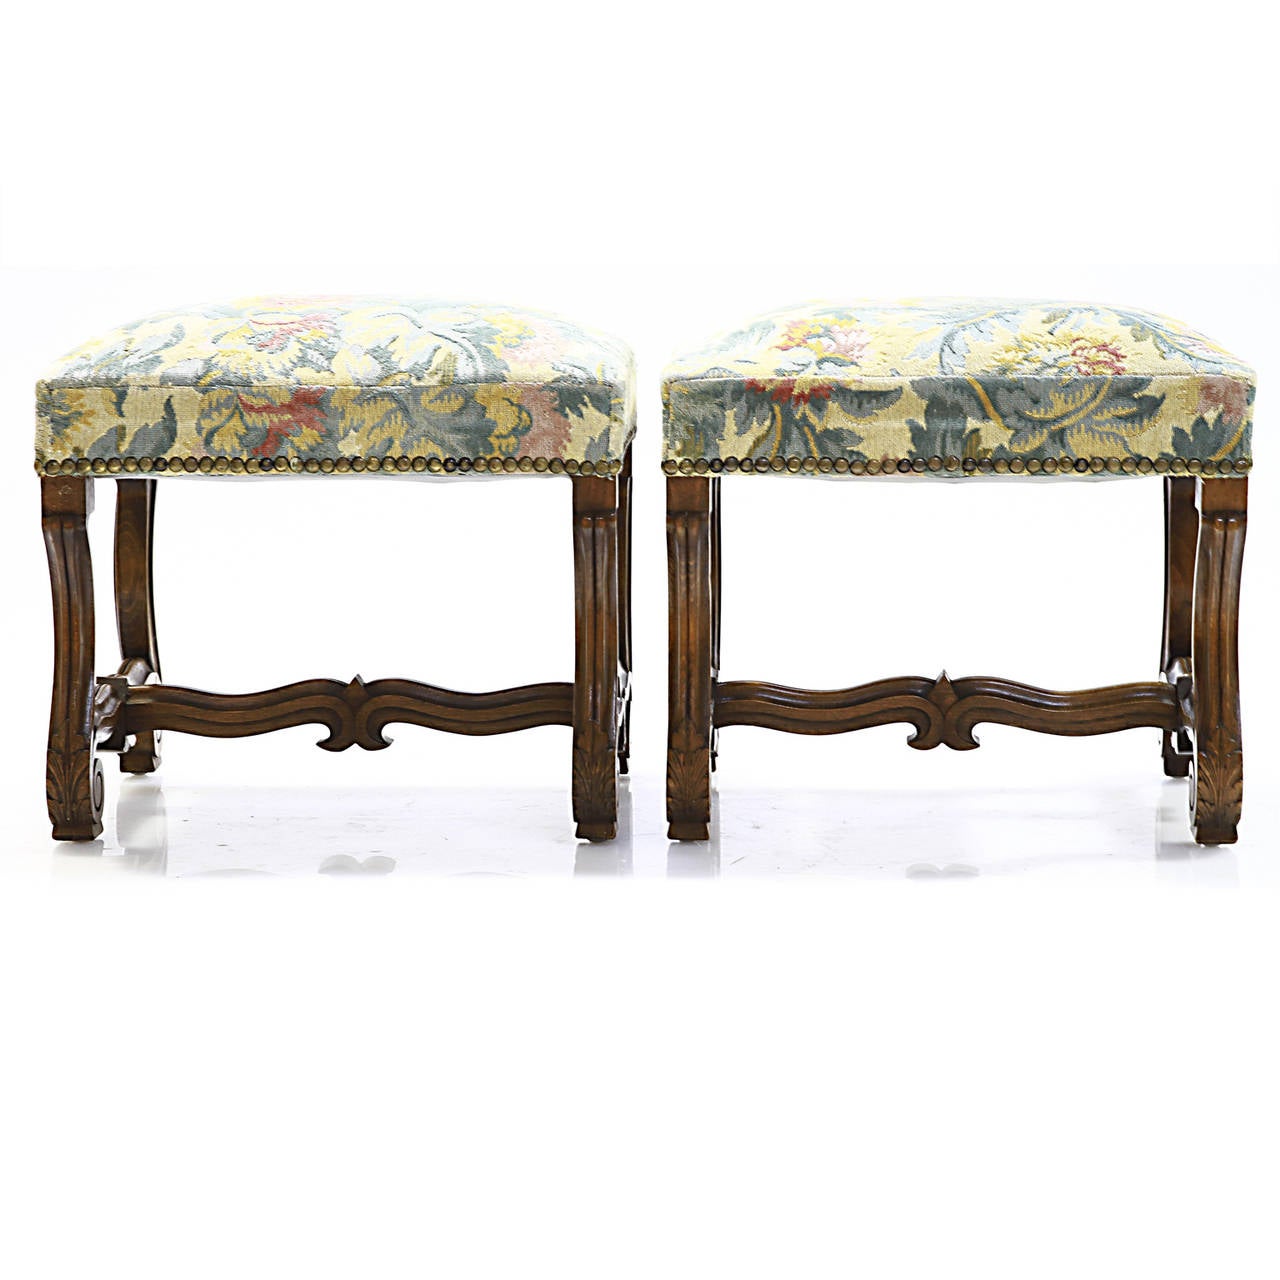 A fine pair of Louis XIV walnut tabouret's resting on a reed console shaped legs. There is a H-stretcher with the center support having a fleur-de-lis design. Very sturdy and freshly waxed patina.